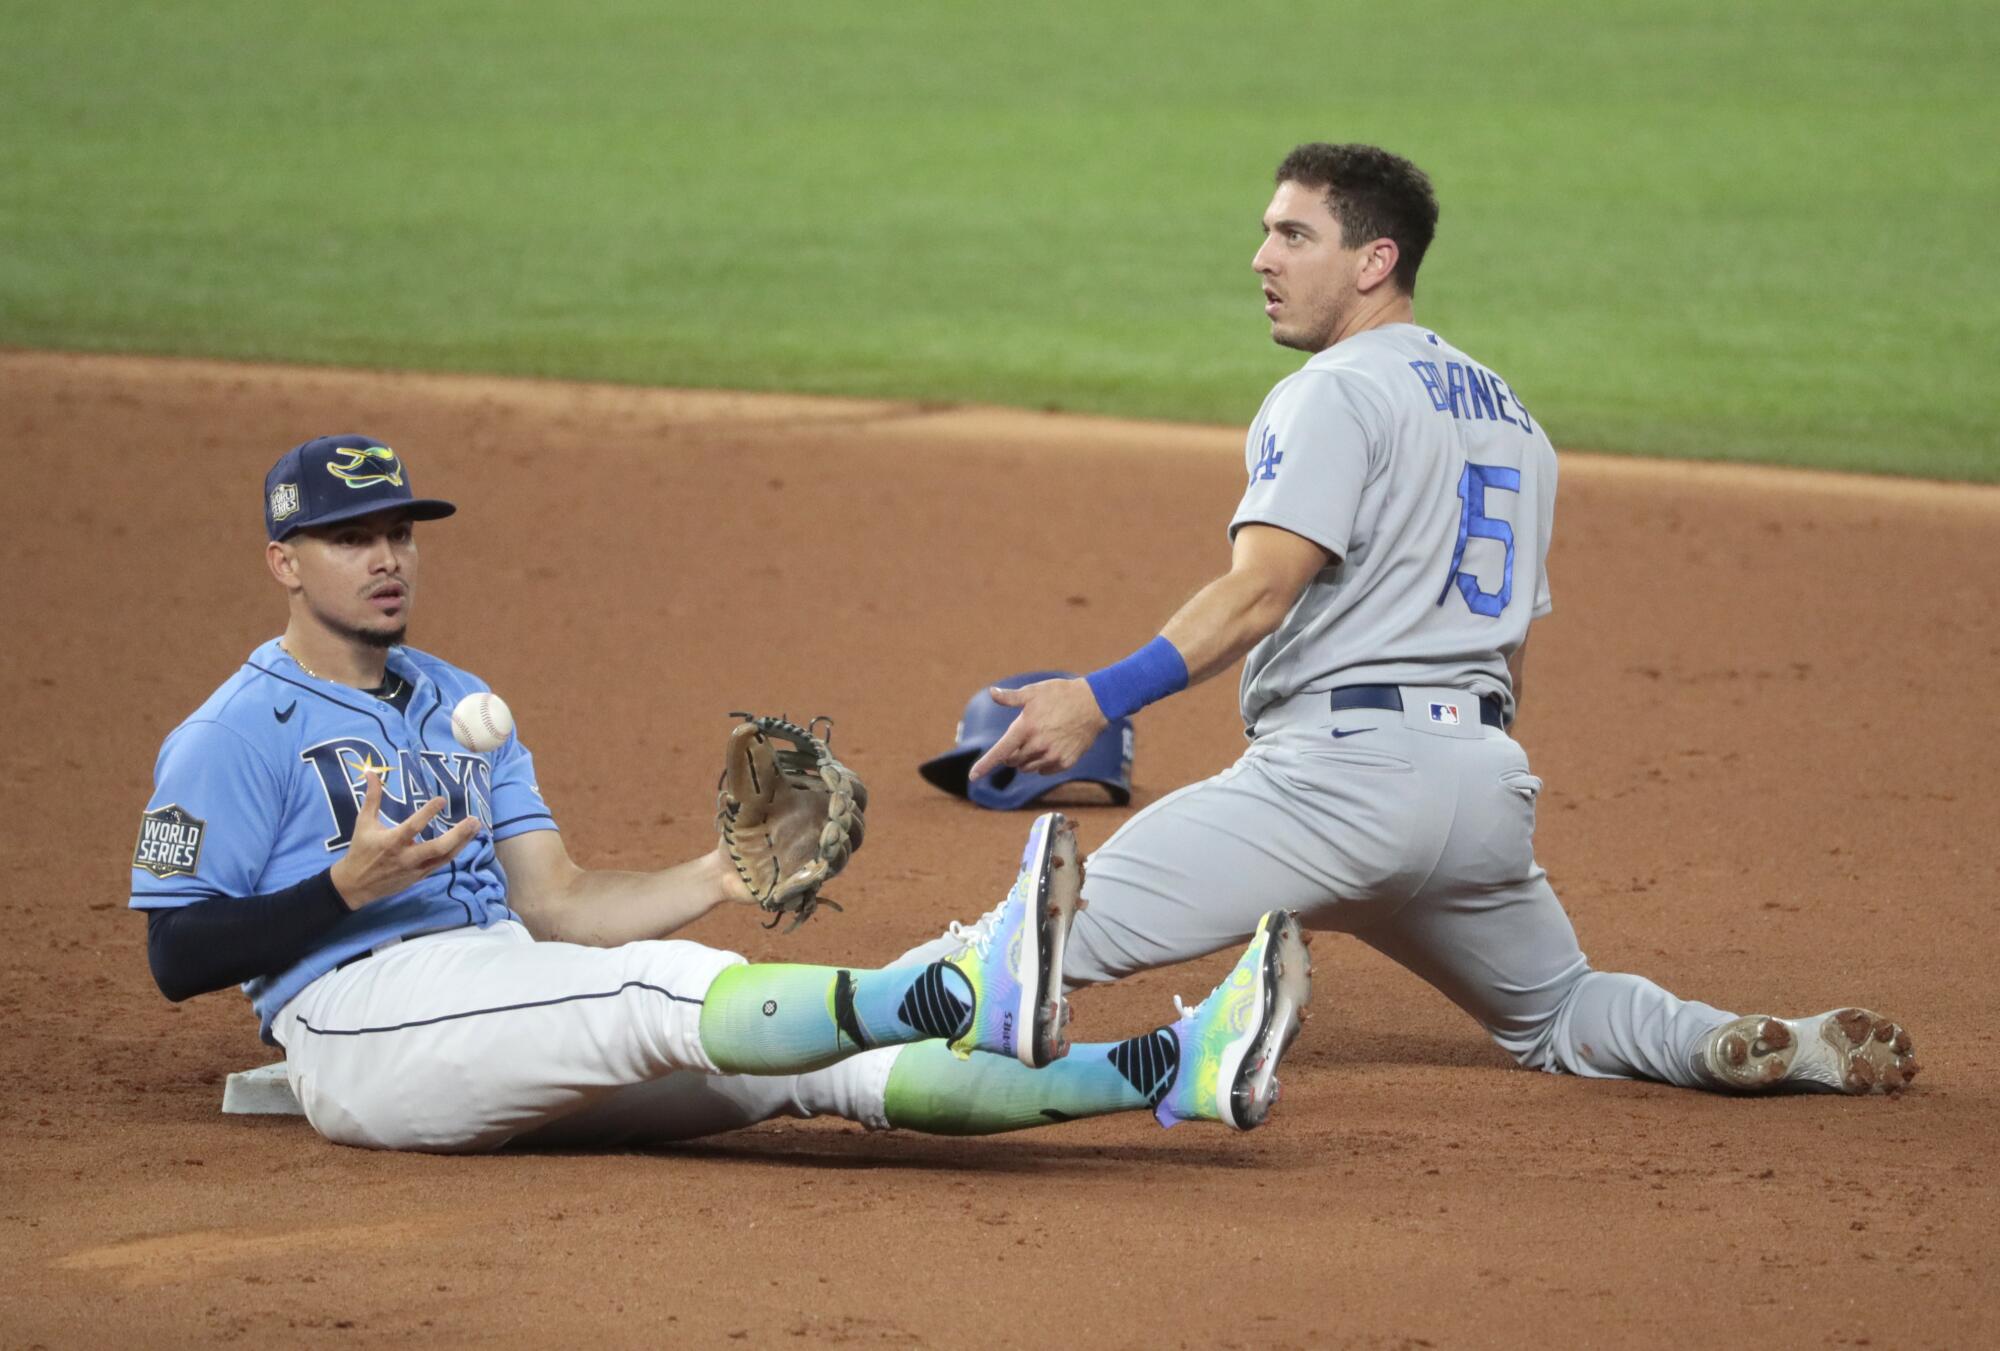 Dodgers catcher Austin Barnes is caught stealing after being tagged by Tampa Bay Rays shortstop Willy Adames.